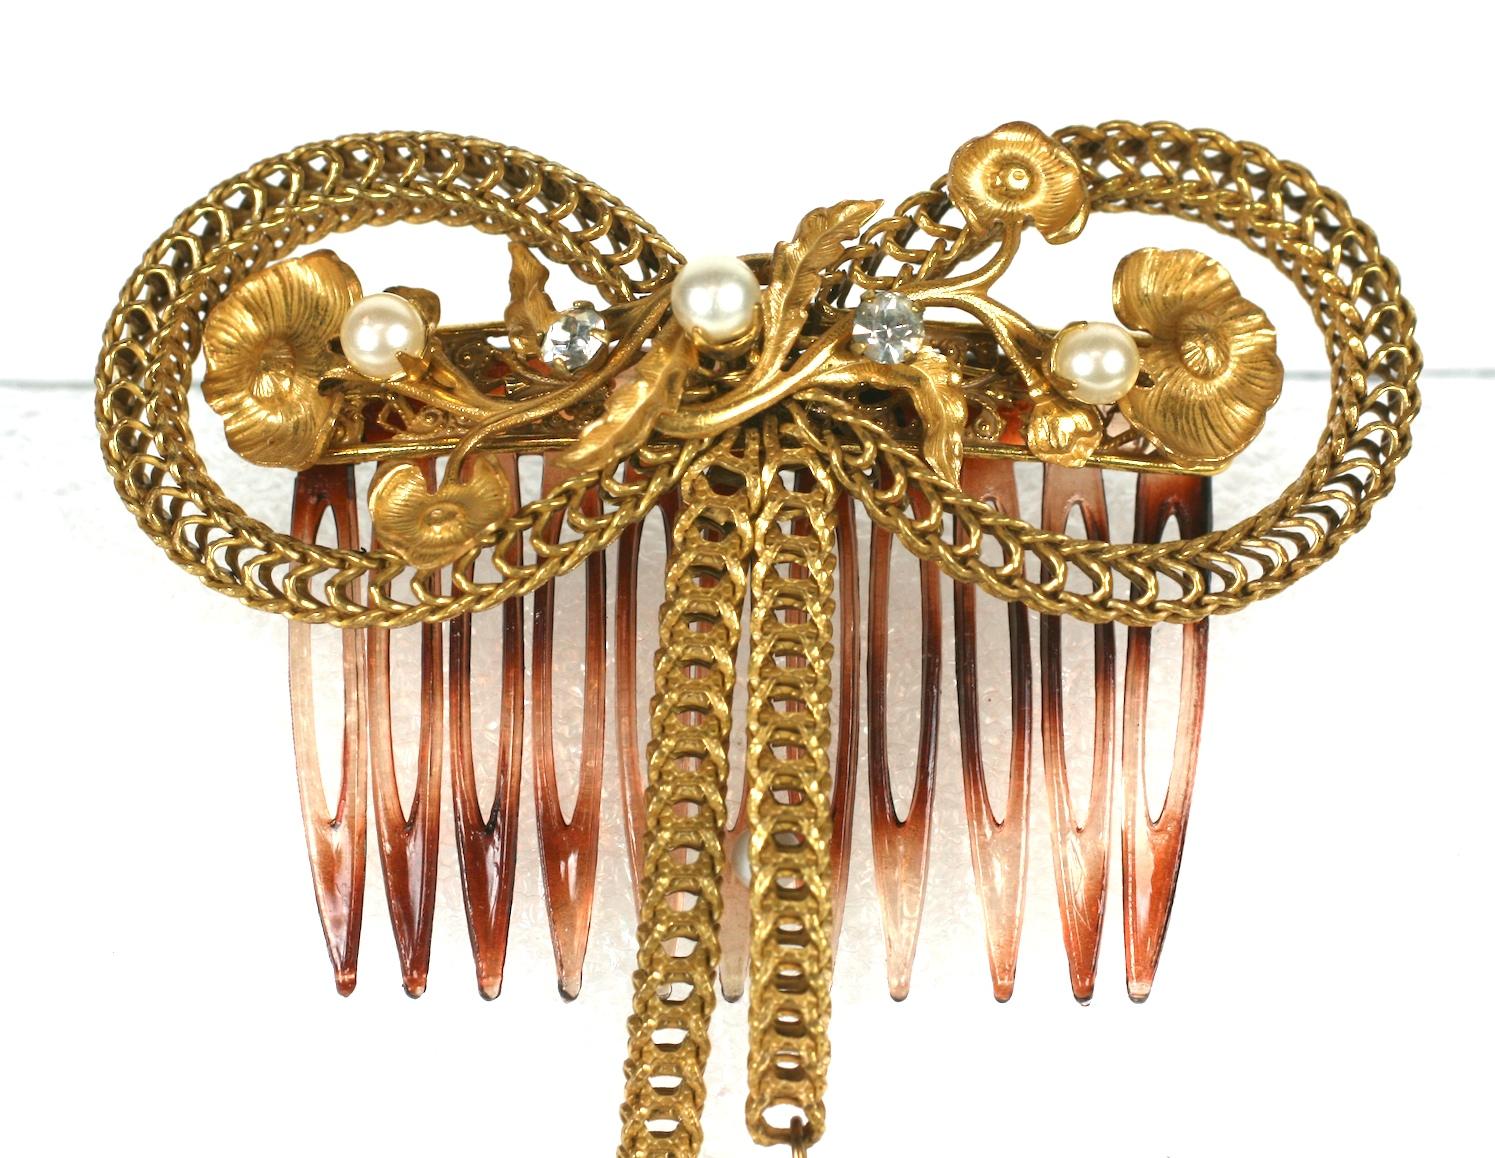 Miriam Haskell Victorian Revival hair comb.  Formed as a bow knot of signature Russian gilt box chain with floral branch filigrees and round pearls.
The bow ends further detailed by baroque dangling pearls with gilt caps. The comb is made of faux